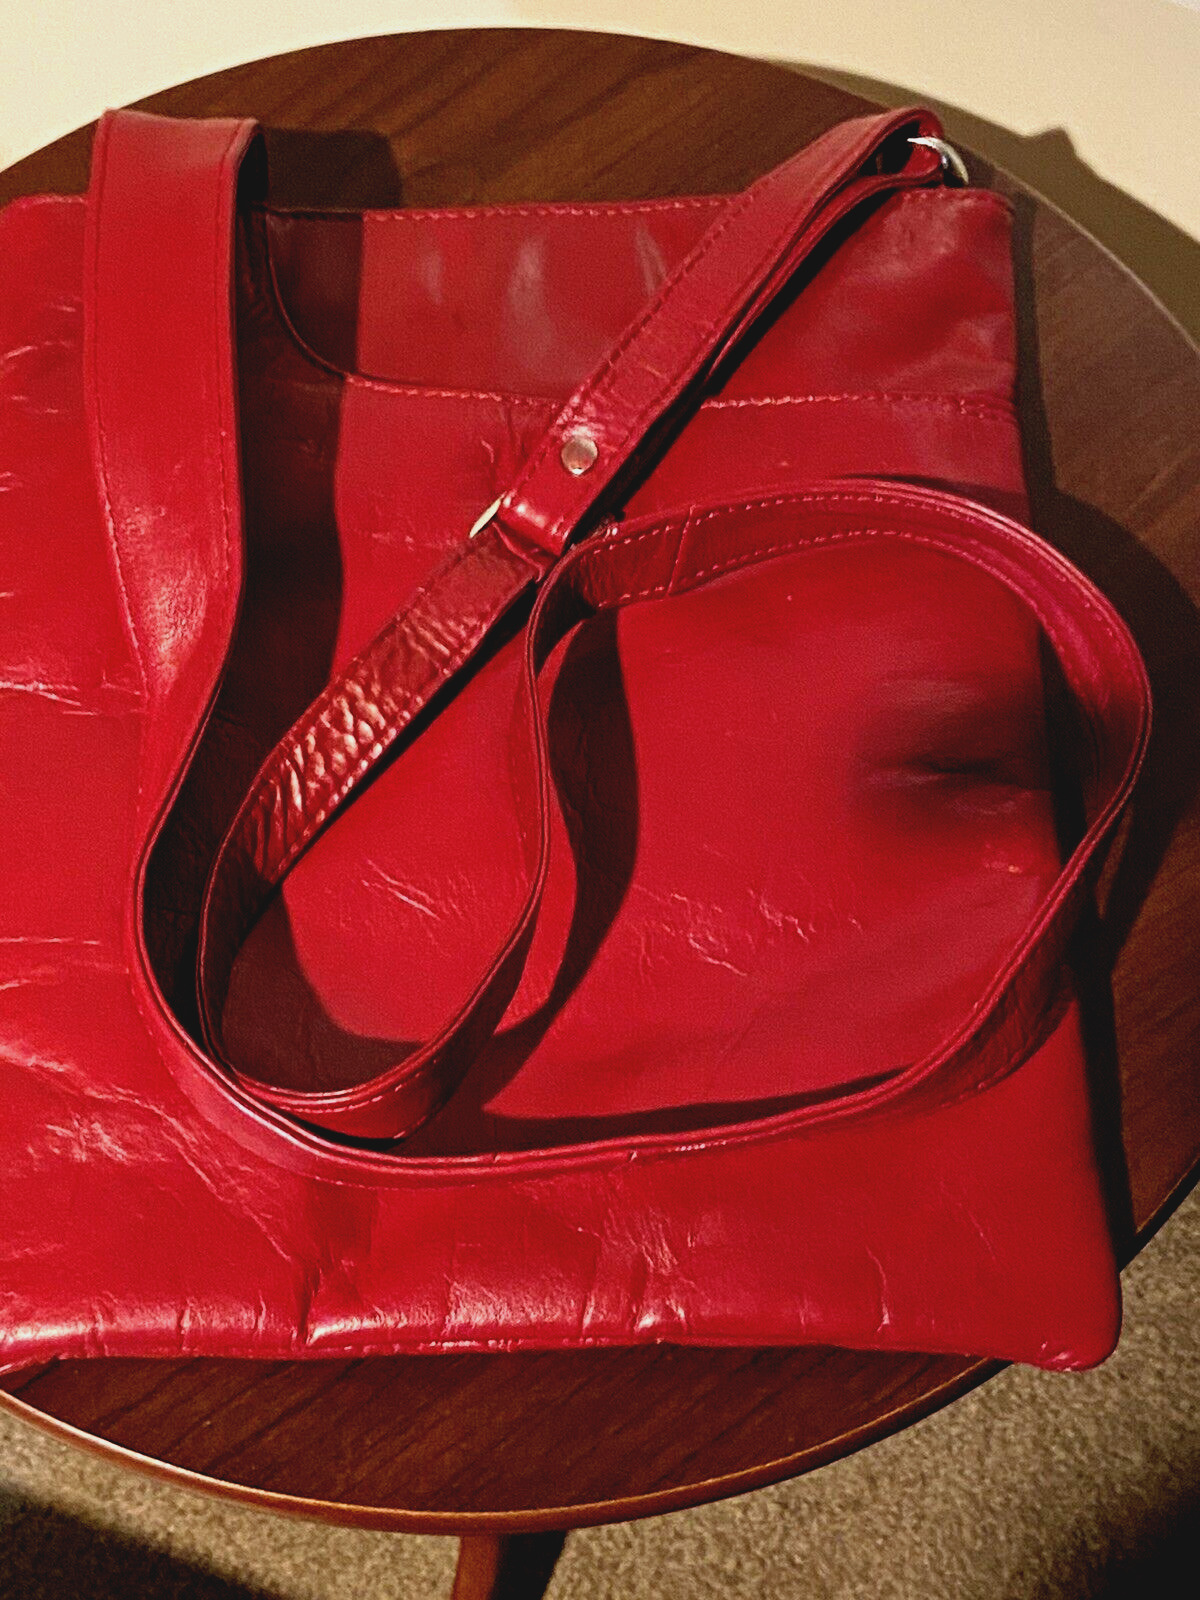 Manzoni Crossbody Cherry Red Leather Bag New without tags